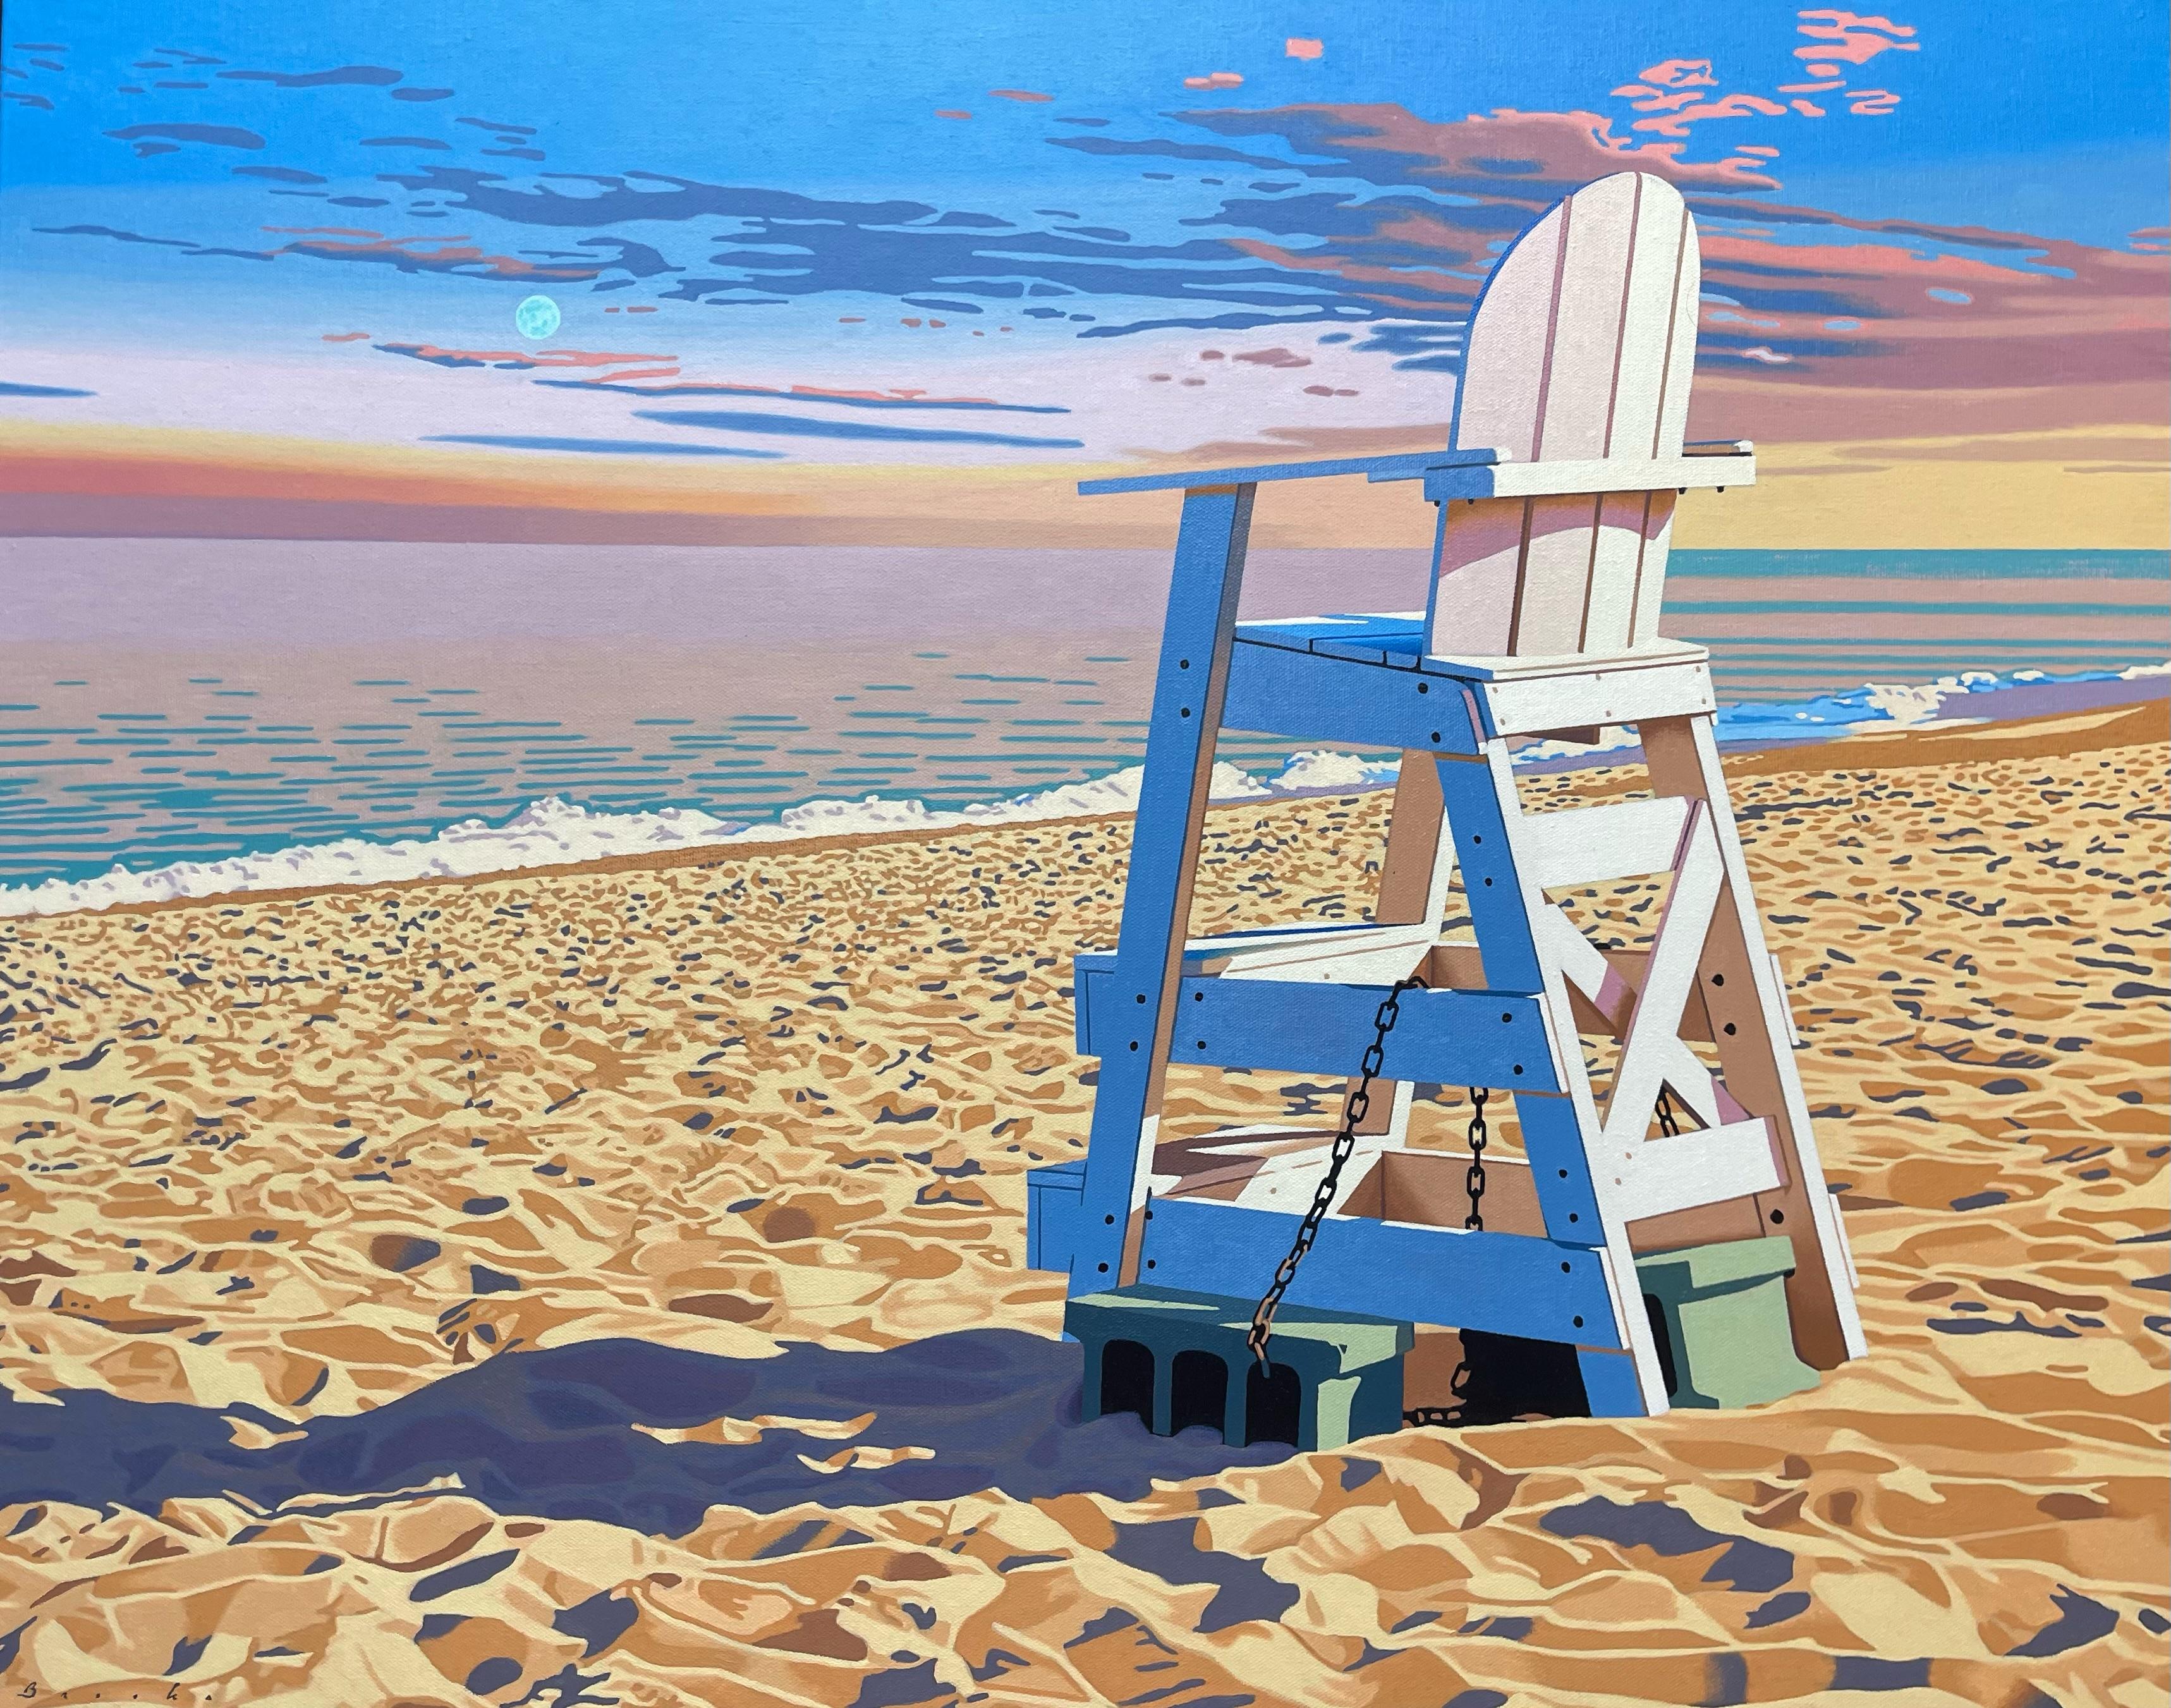 "Lifeguard Chair" photorealist oil painting of a white lifeguard stand on beach